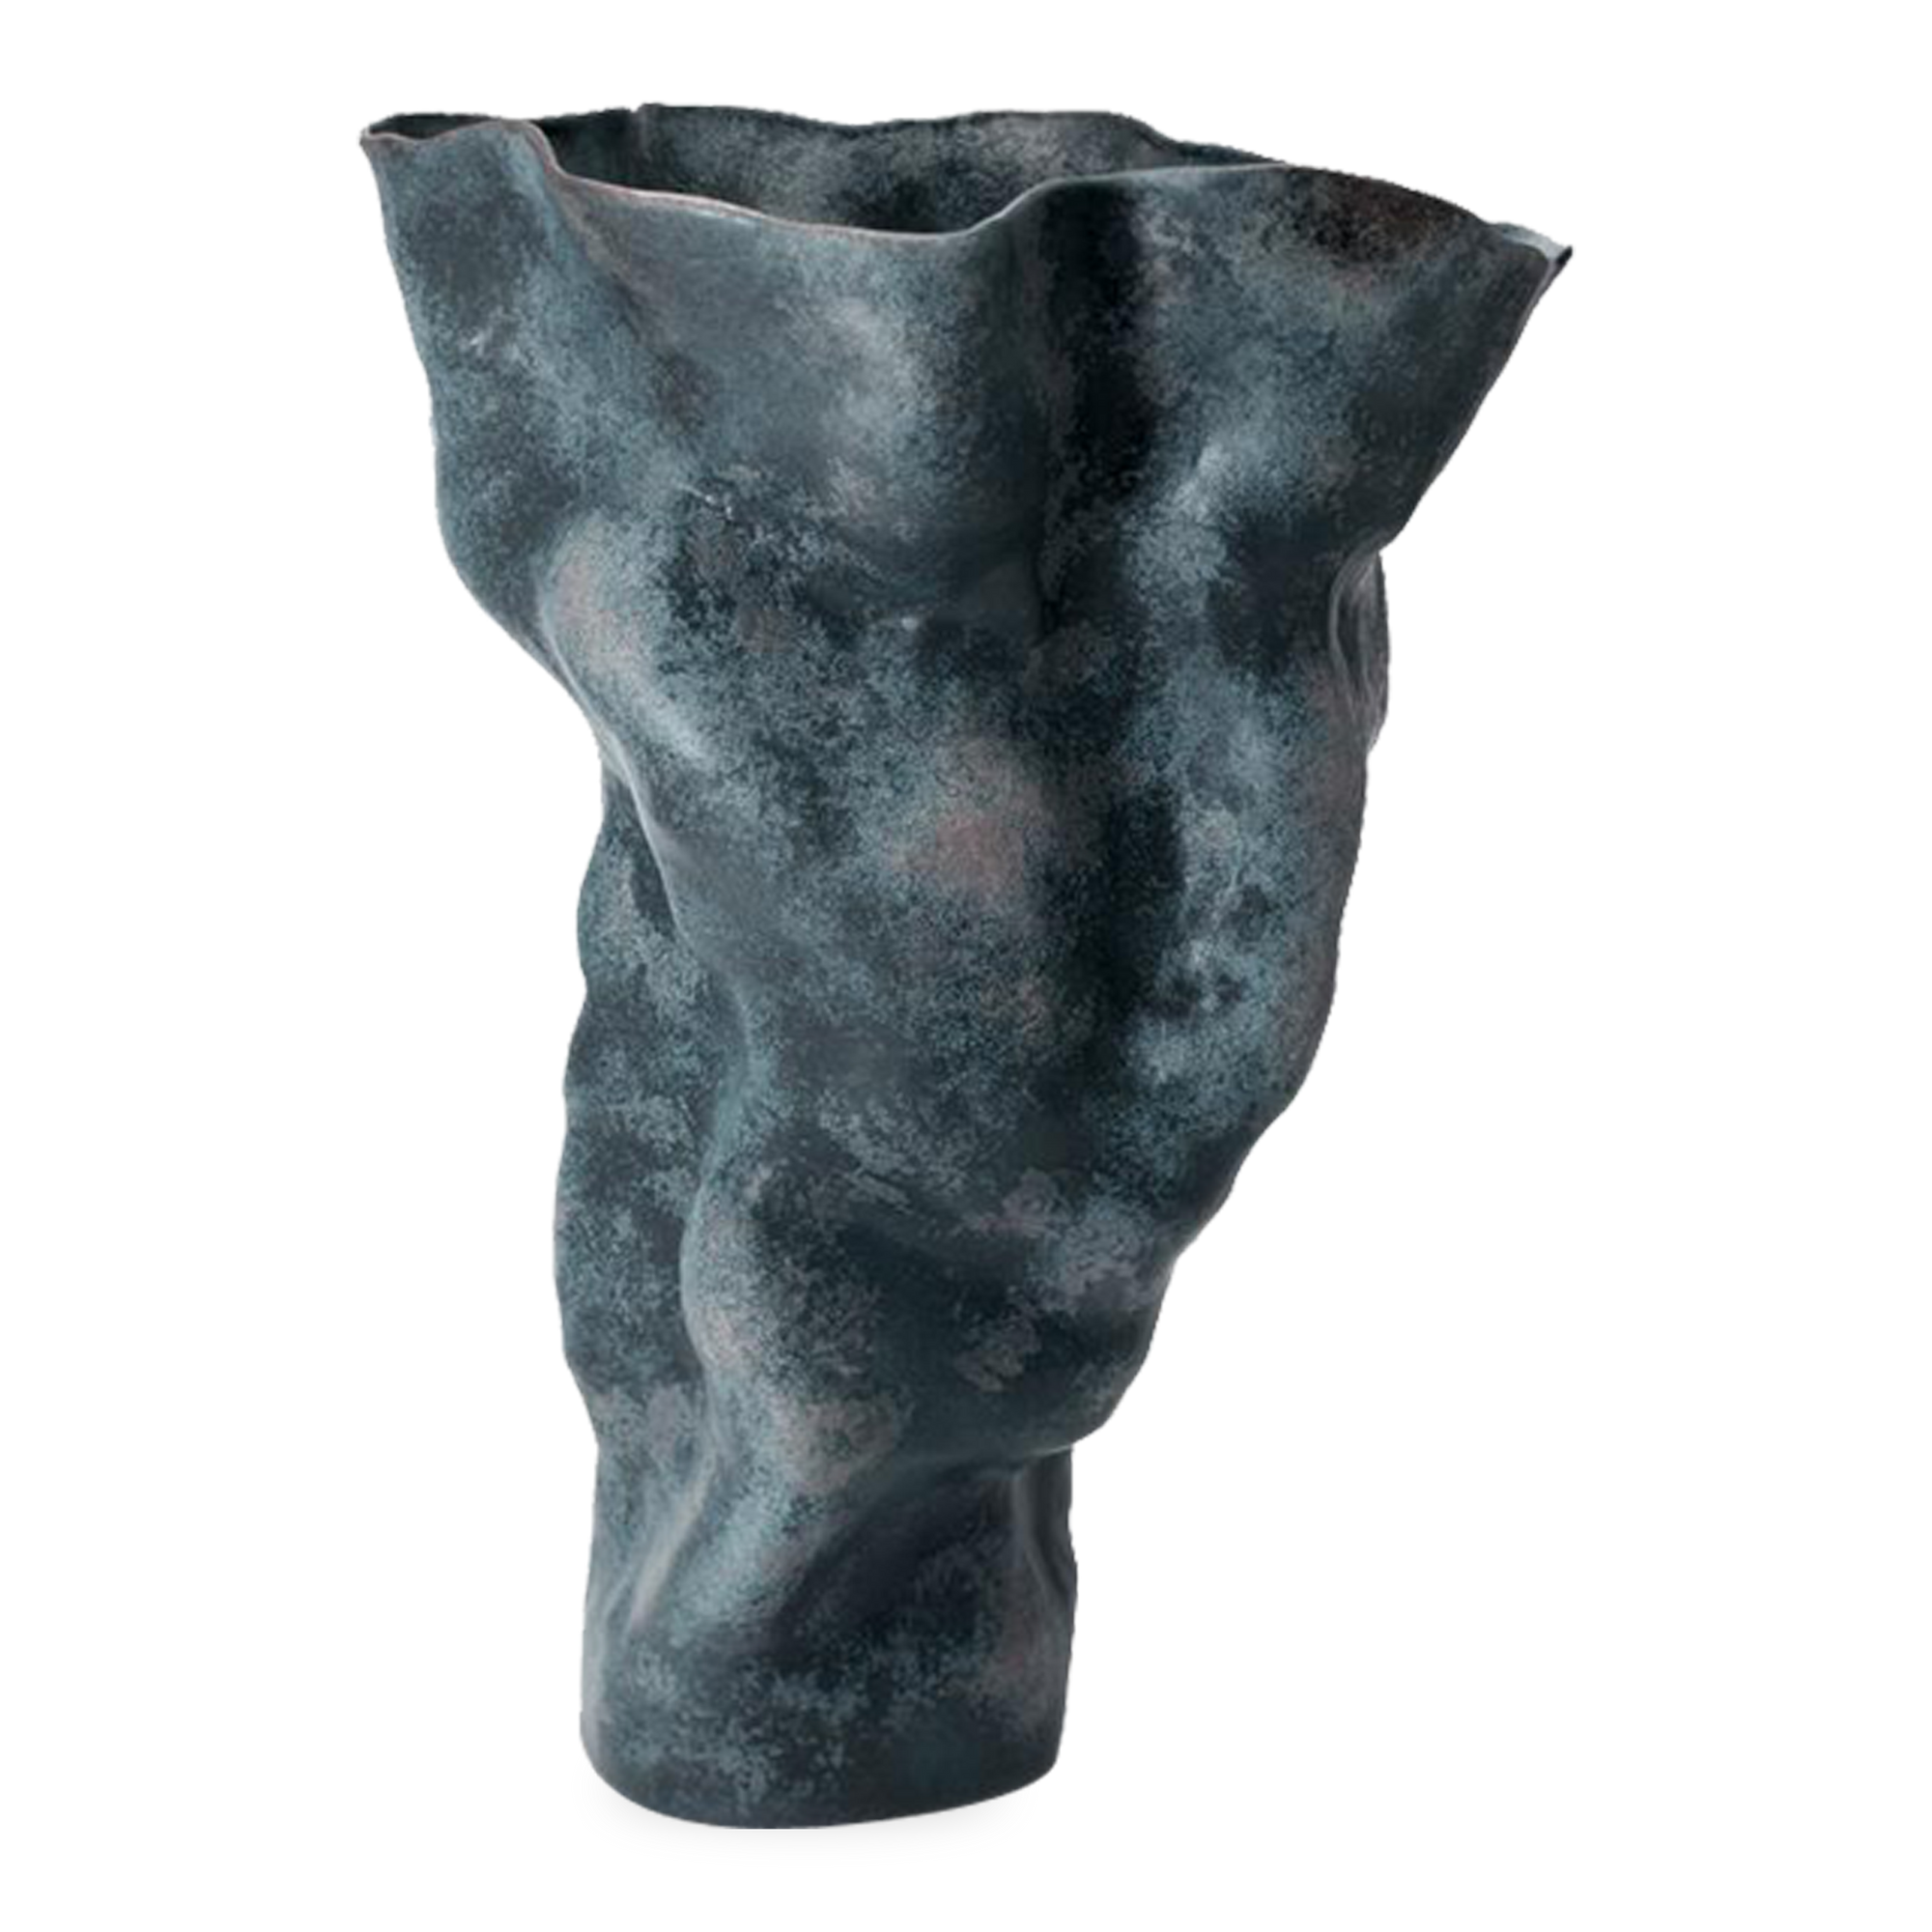 Avaricious in size and focusing on brilliantly unique forms, the Timna Vase features a midnight blue porcelain body with an ancient feel - inspired by the mineral tones of the eart